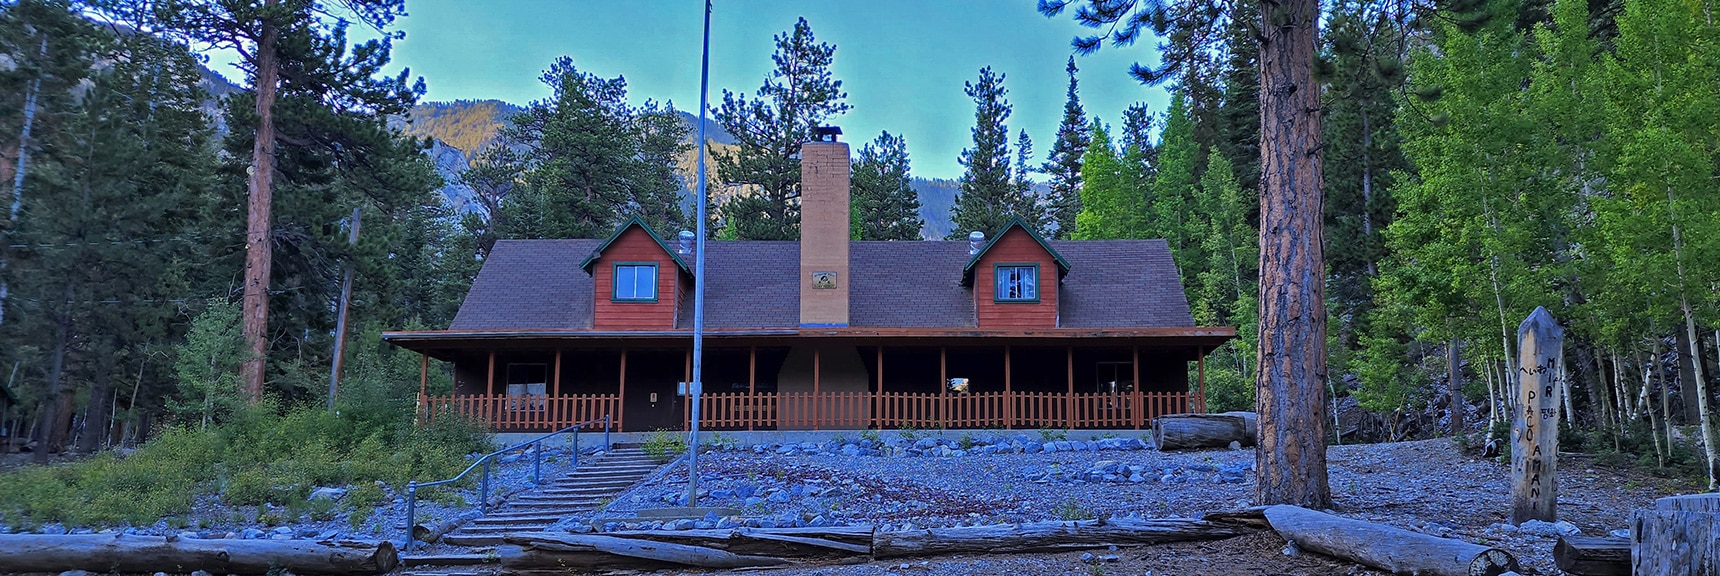 Hudlow Hall, Main Dining Hall for Foxtail Girl Scouts Camp | Mummy Mountain Grand Crossing | Lee Canyon to Deer Creek Road | Mt Charleston Wilderness | Spring Mountains, Nevada |